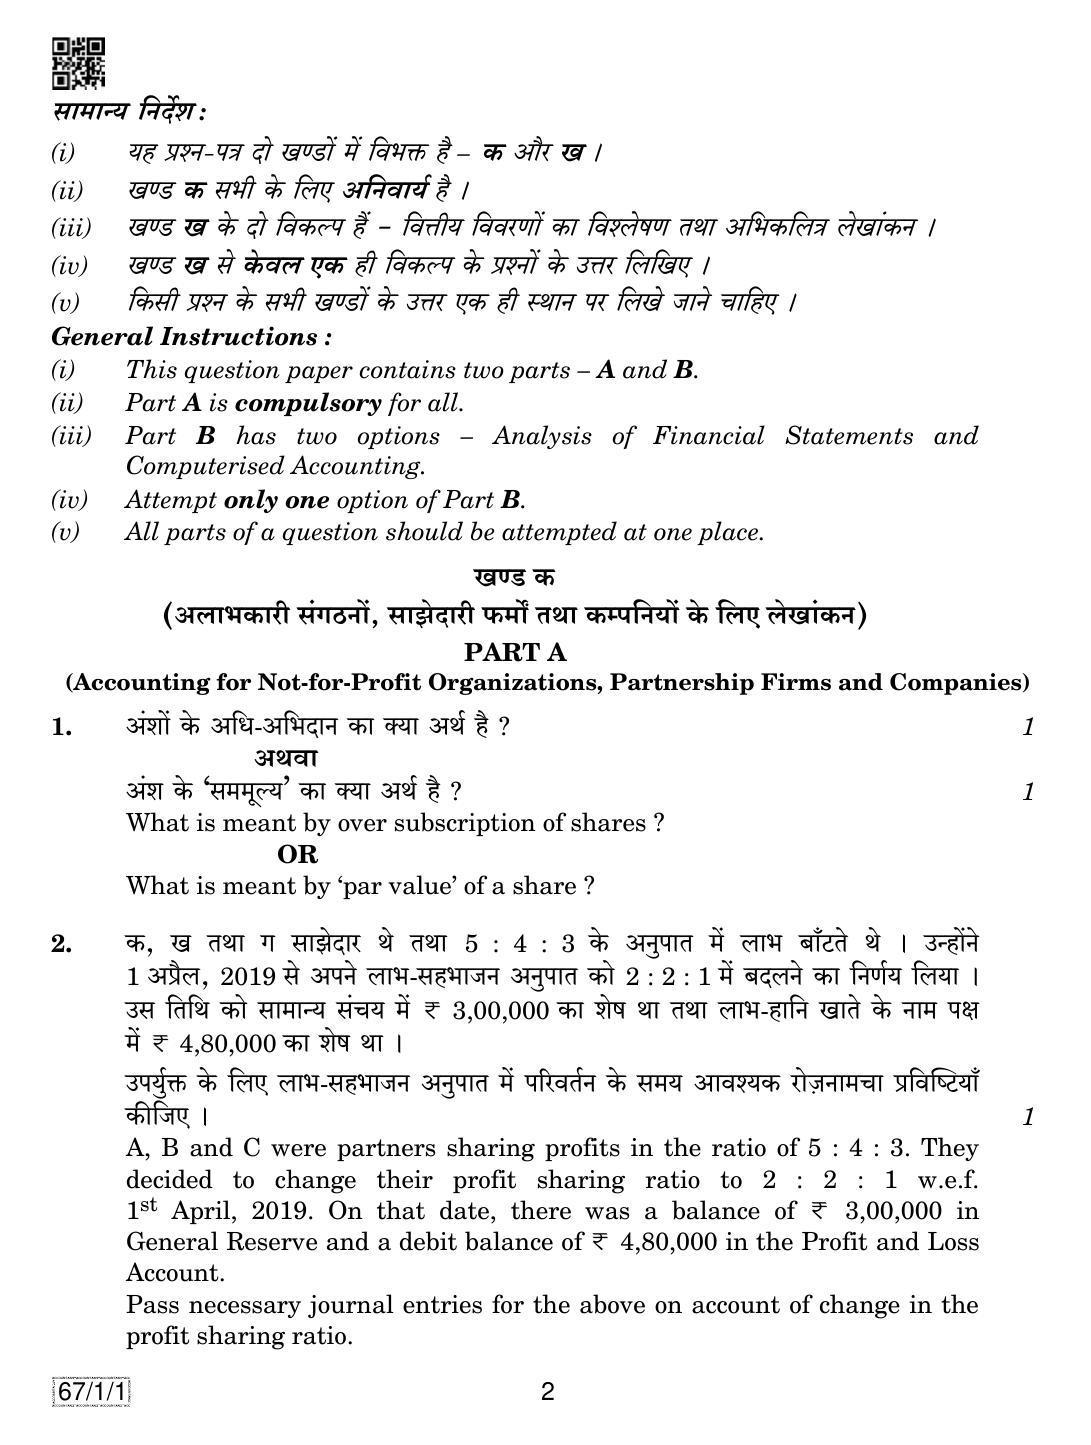 CBSE Class 12 67-1-1 ACCOUNTANCY 2019 Compartment Question Paper - Page 2